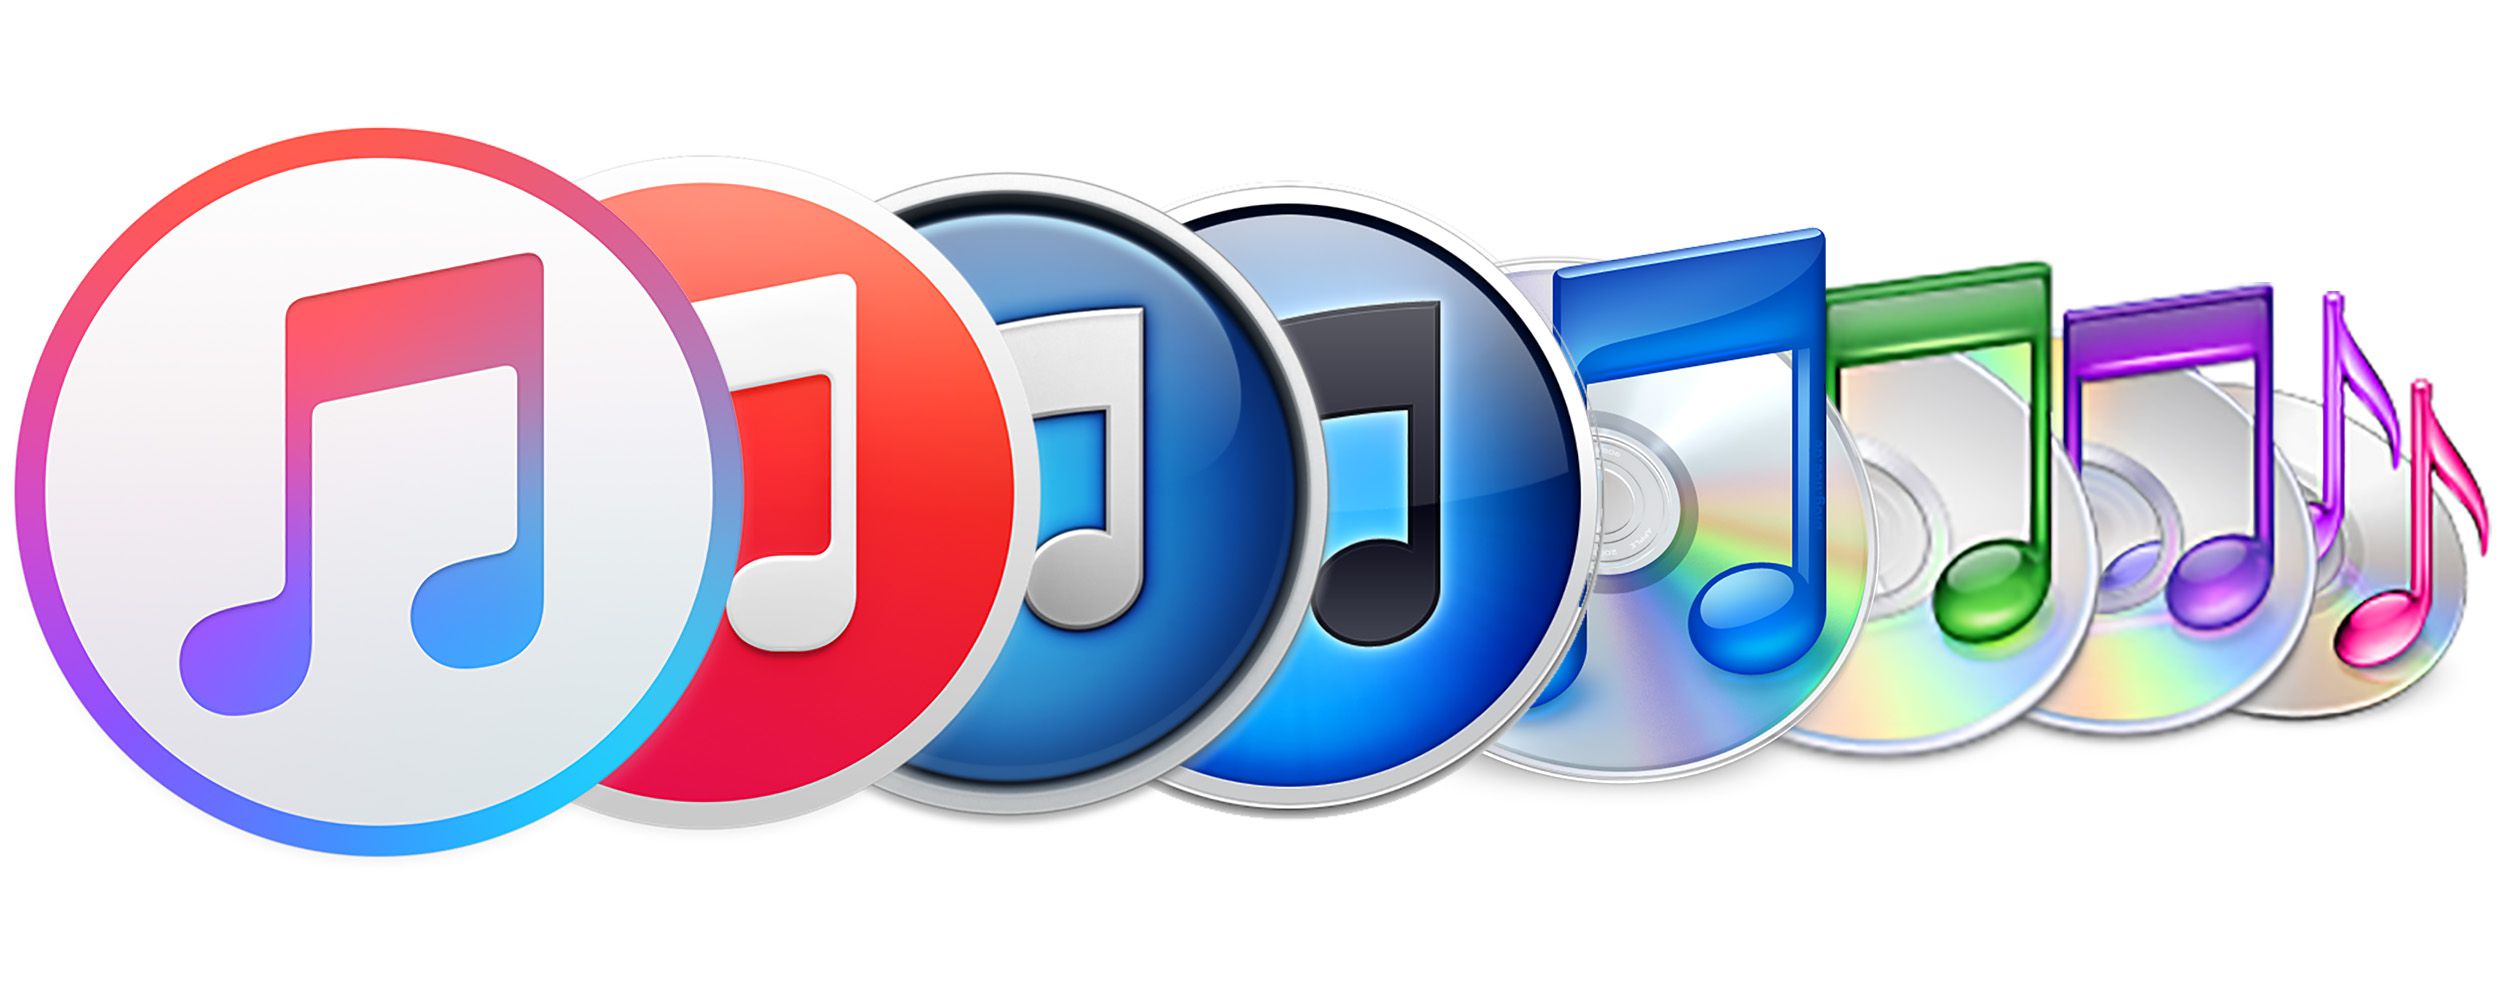 Itunes 10.7 for mac os x 10.5 8